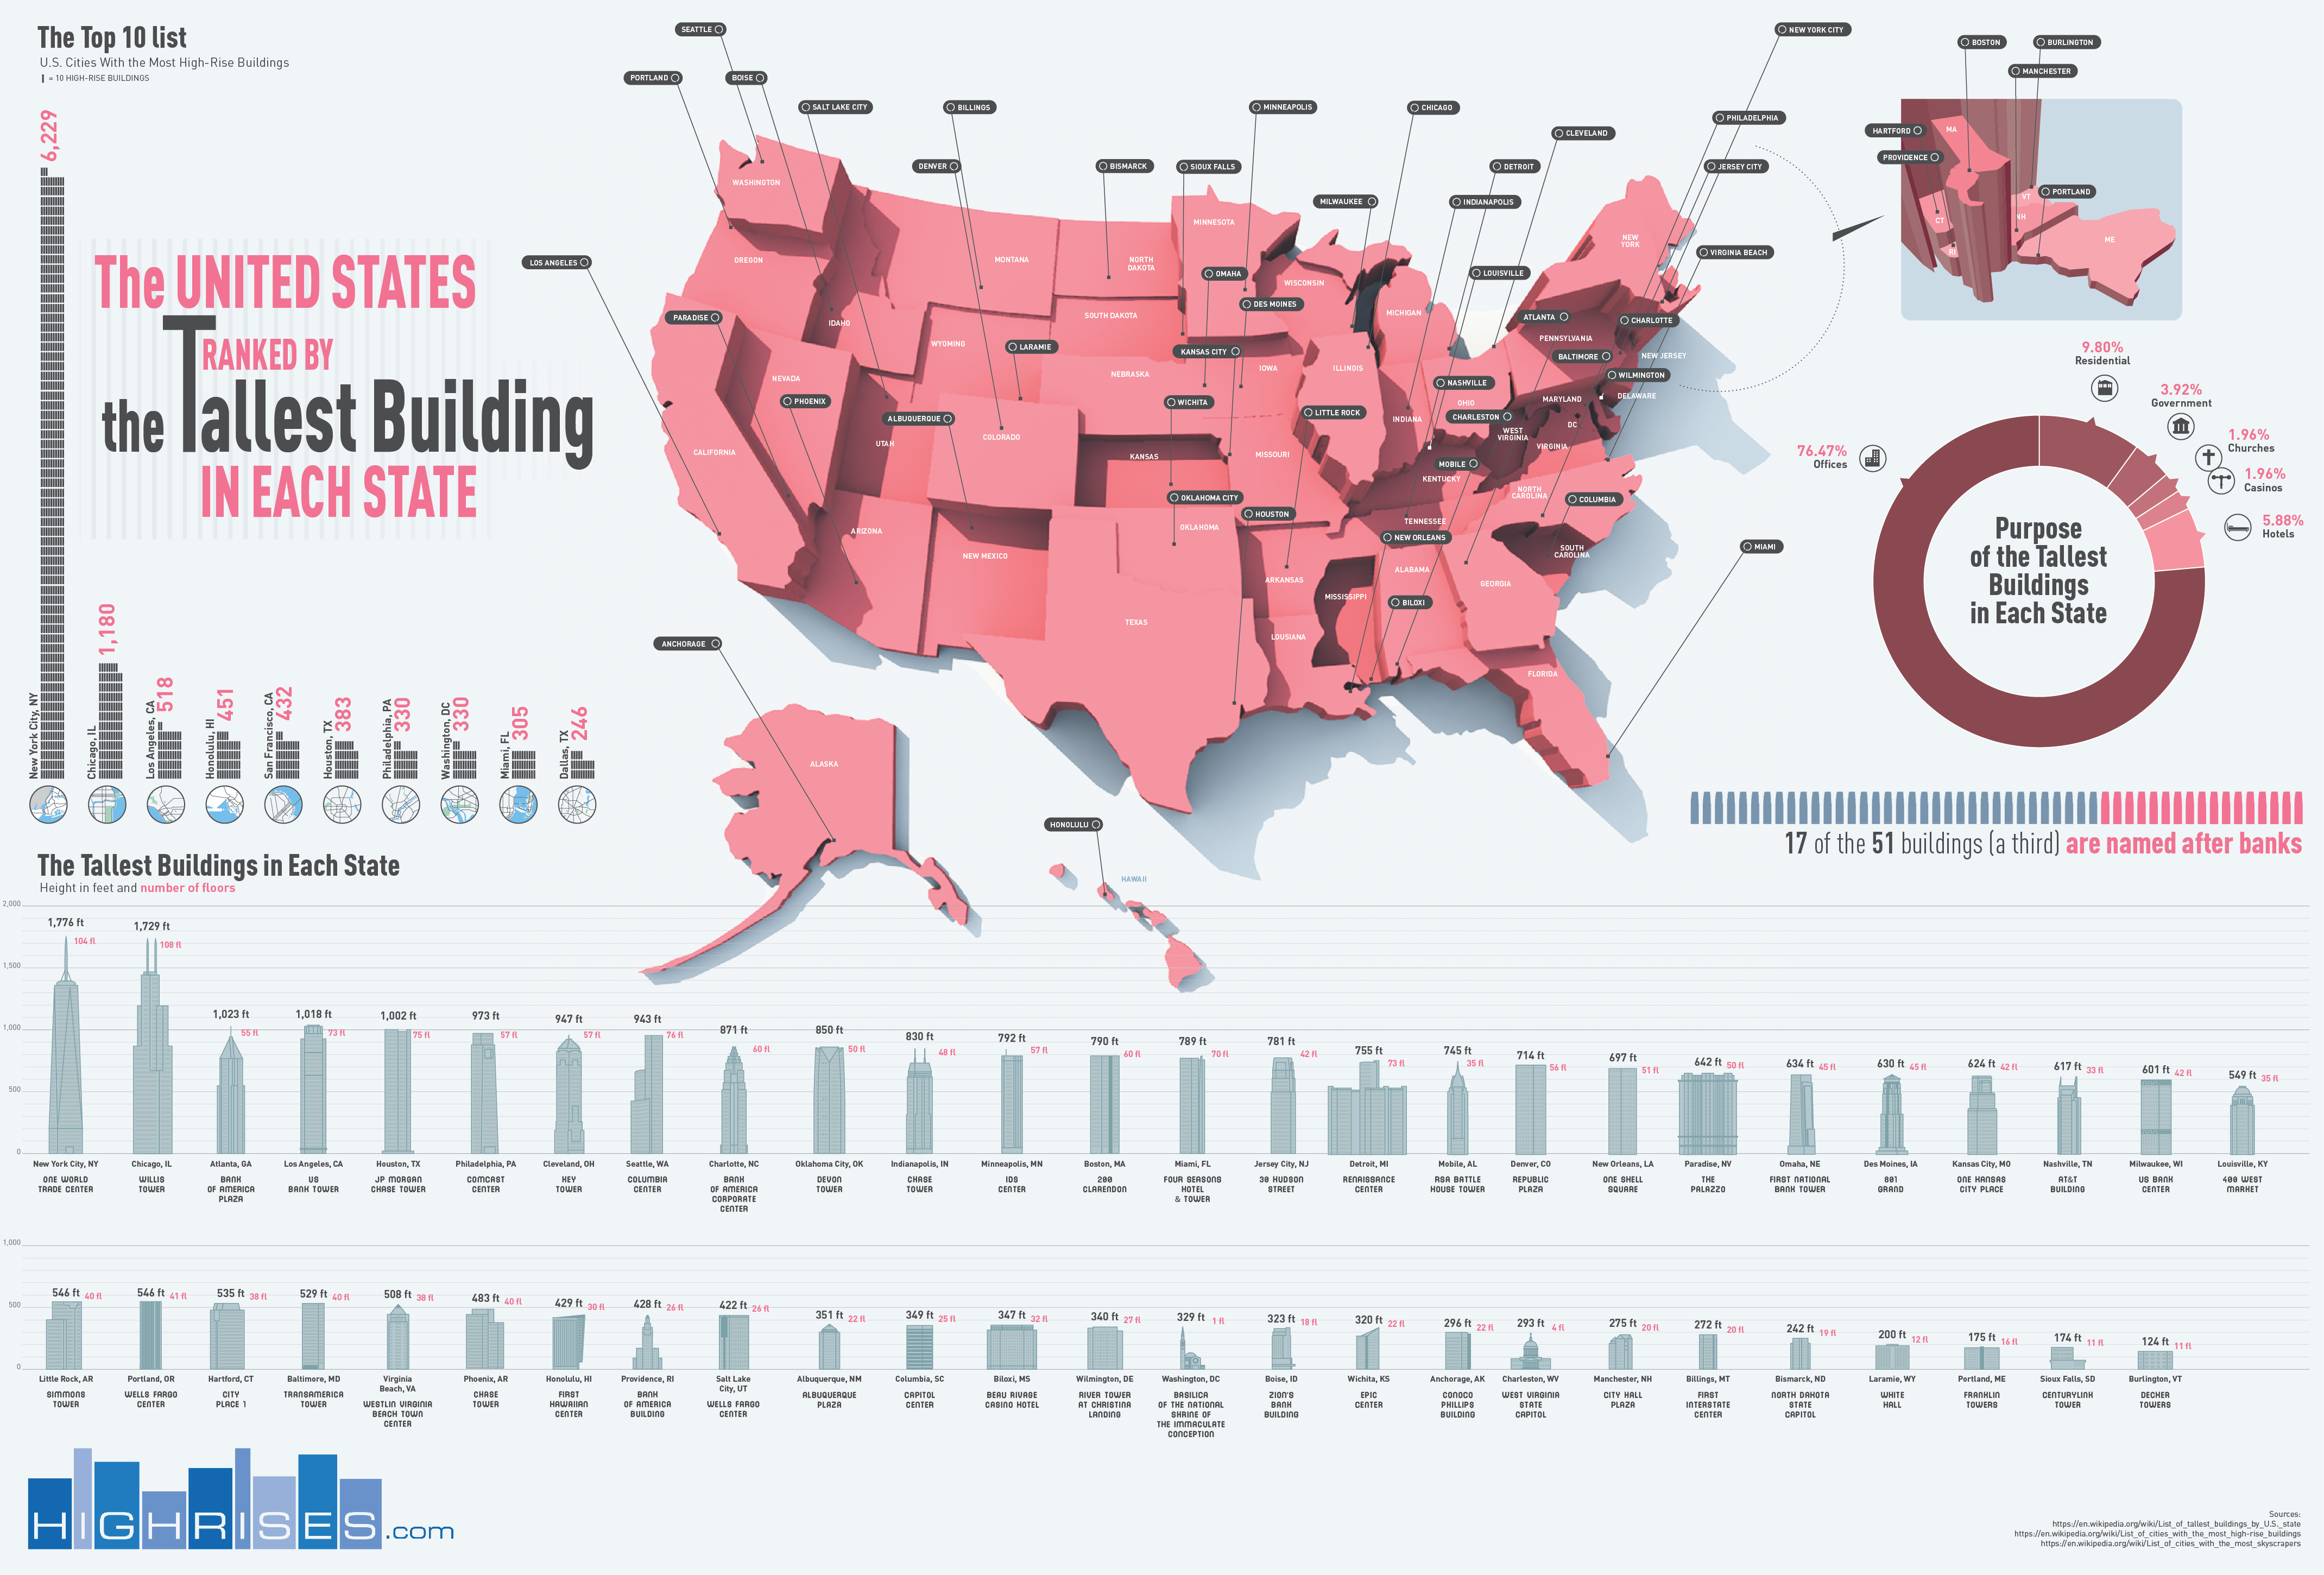 The United States Ranked by the Tallest Building in Each State Map